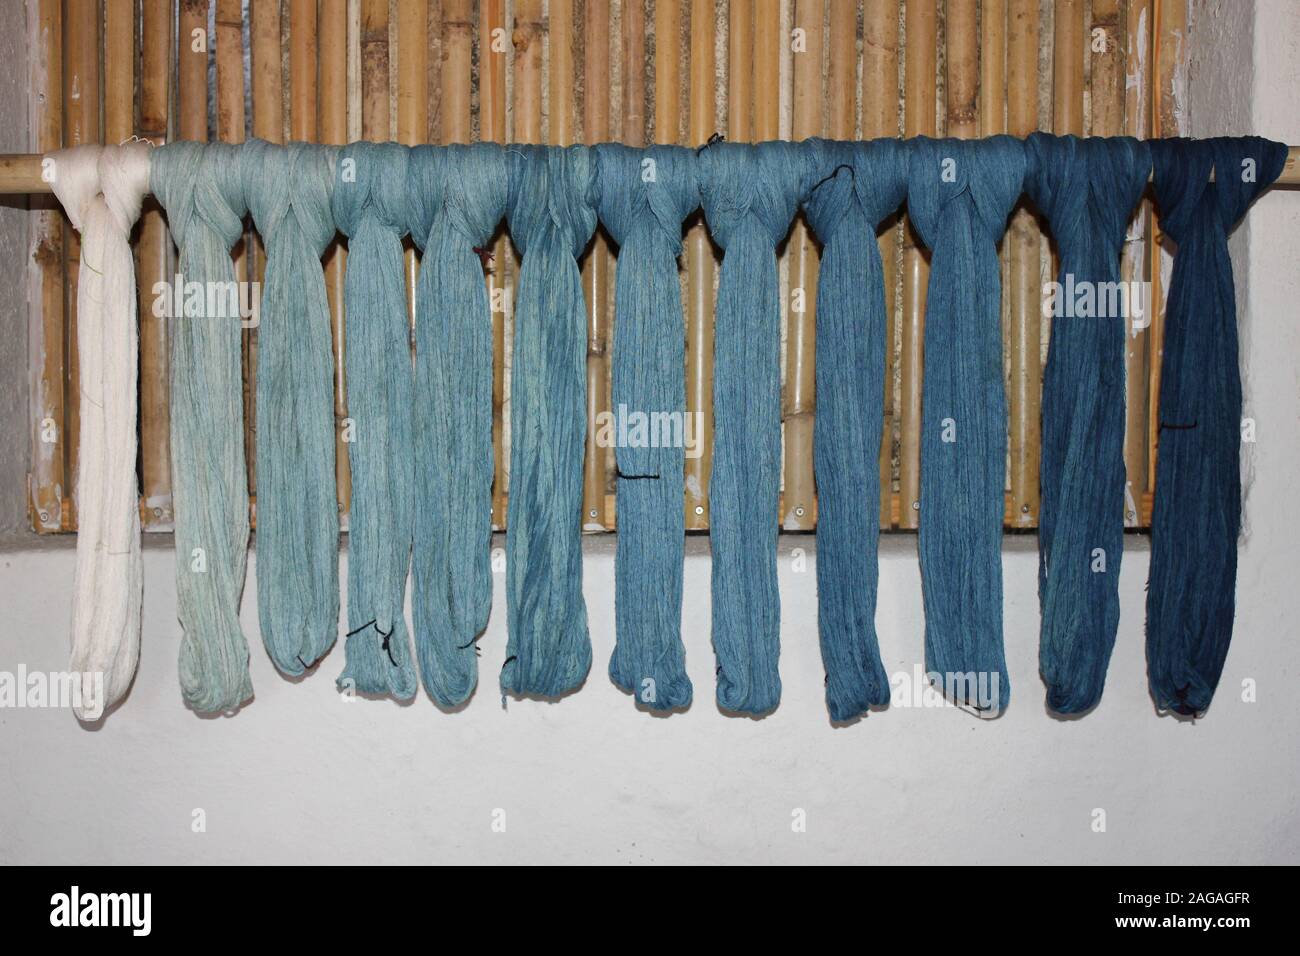 Yarn Dyed In Different Shades Of Indigo, Great Rann Of Kutch, Gujarat, India Stock Photo